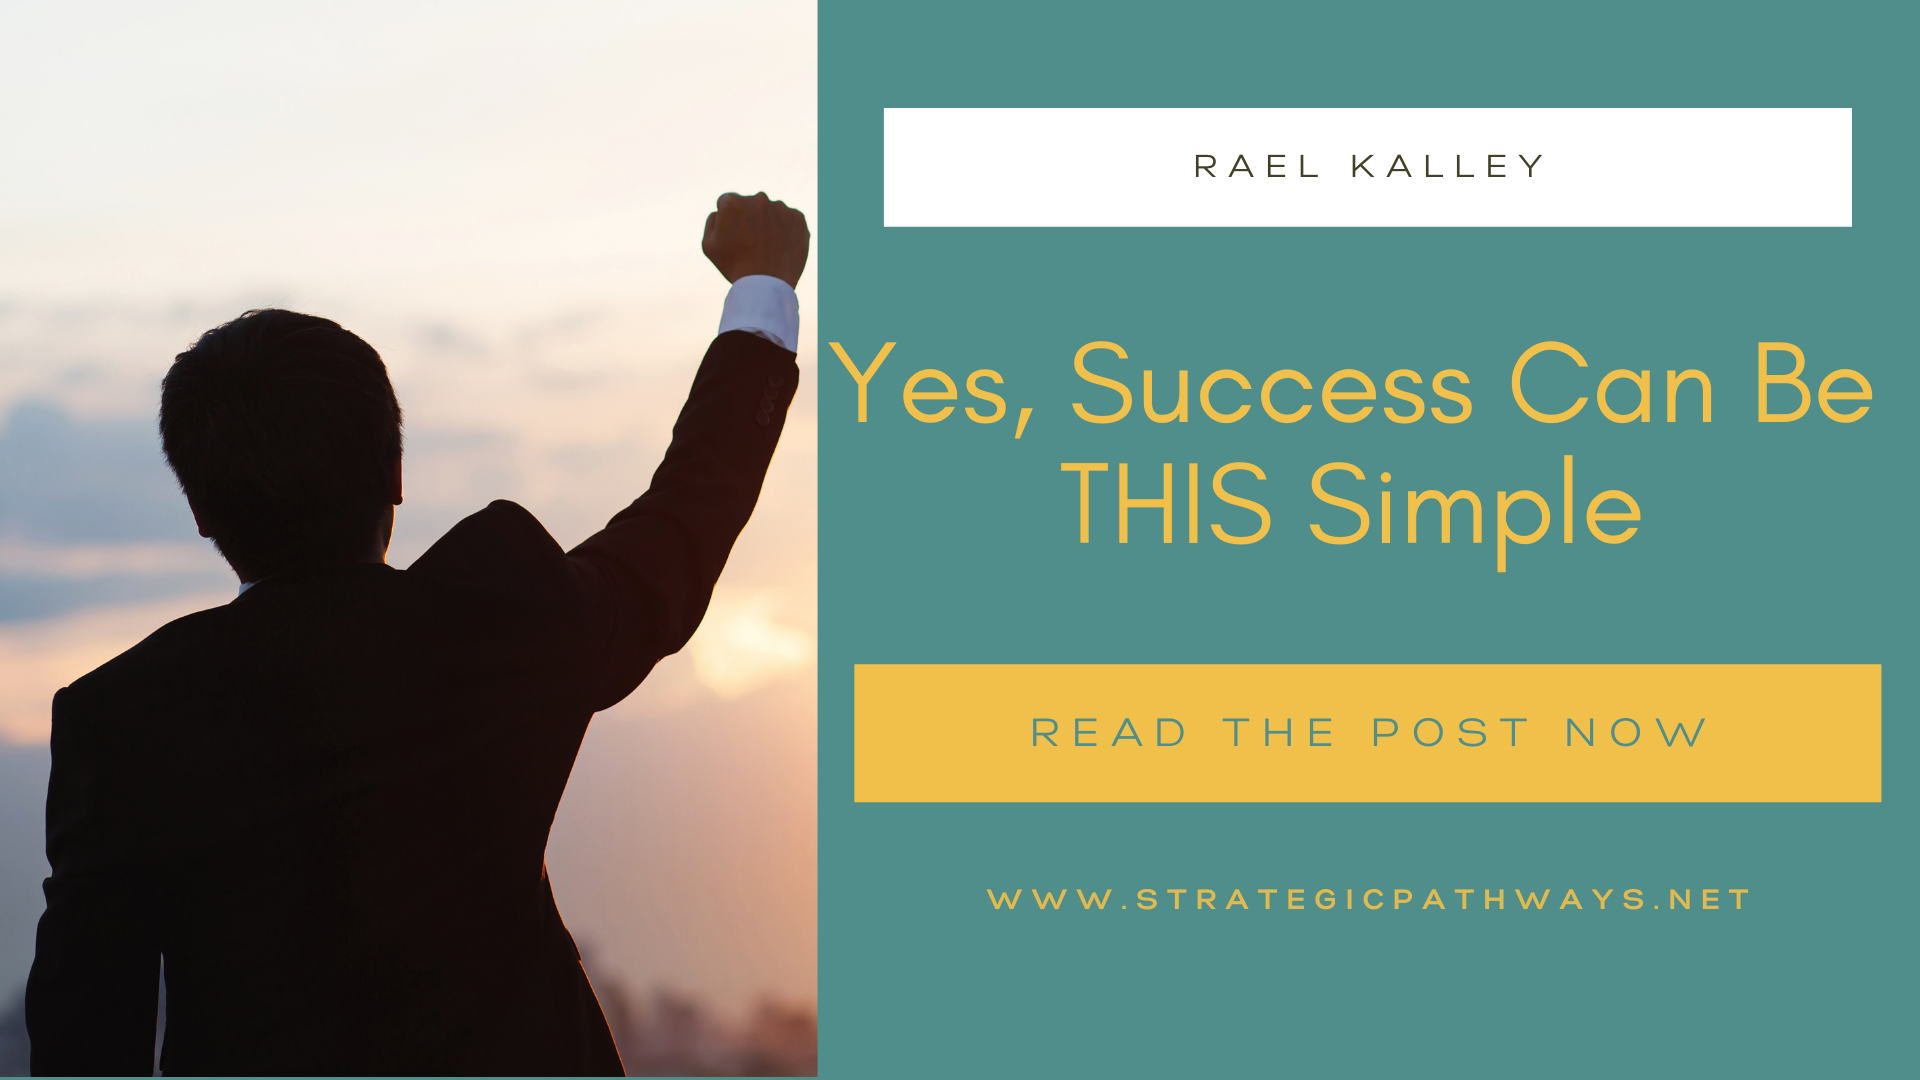 Text reading "Yes, Success Can Be THIS Simple" and a man rising his fist in the air